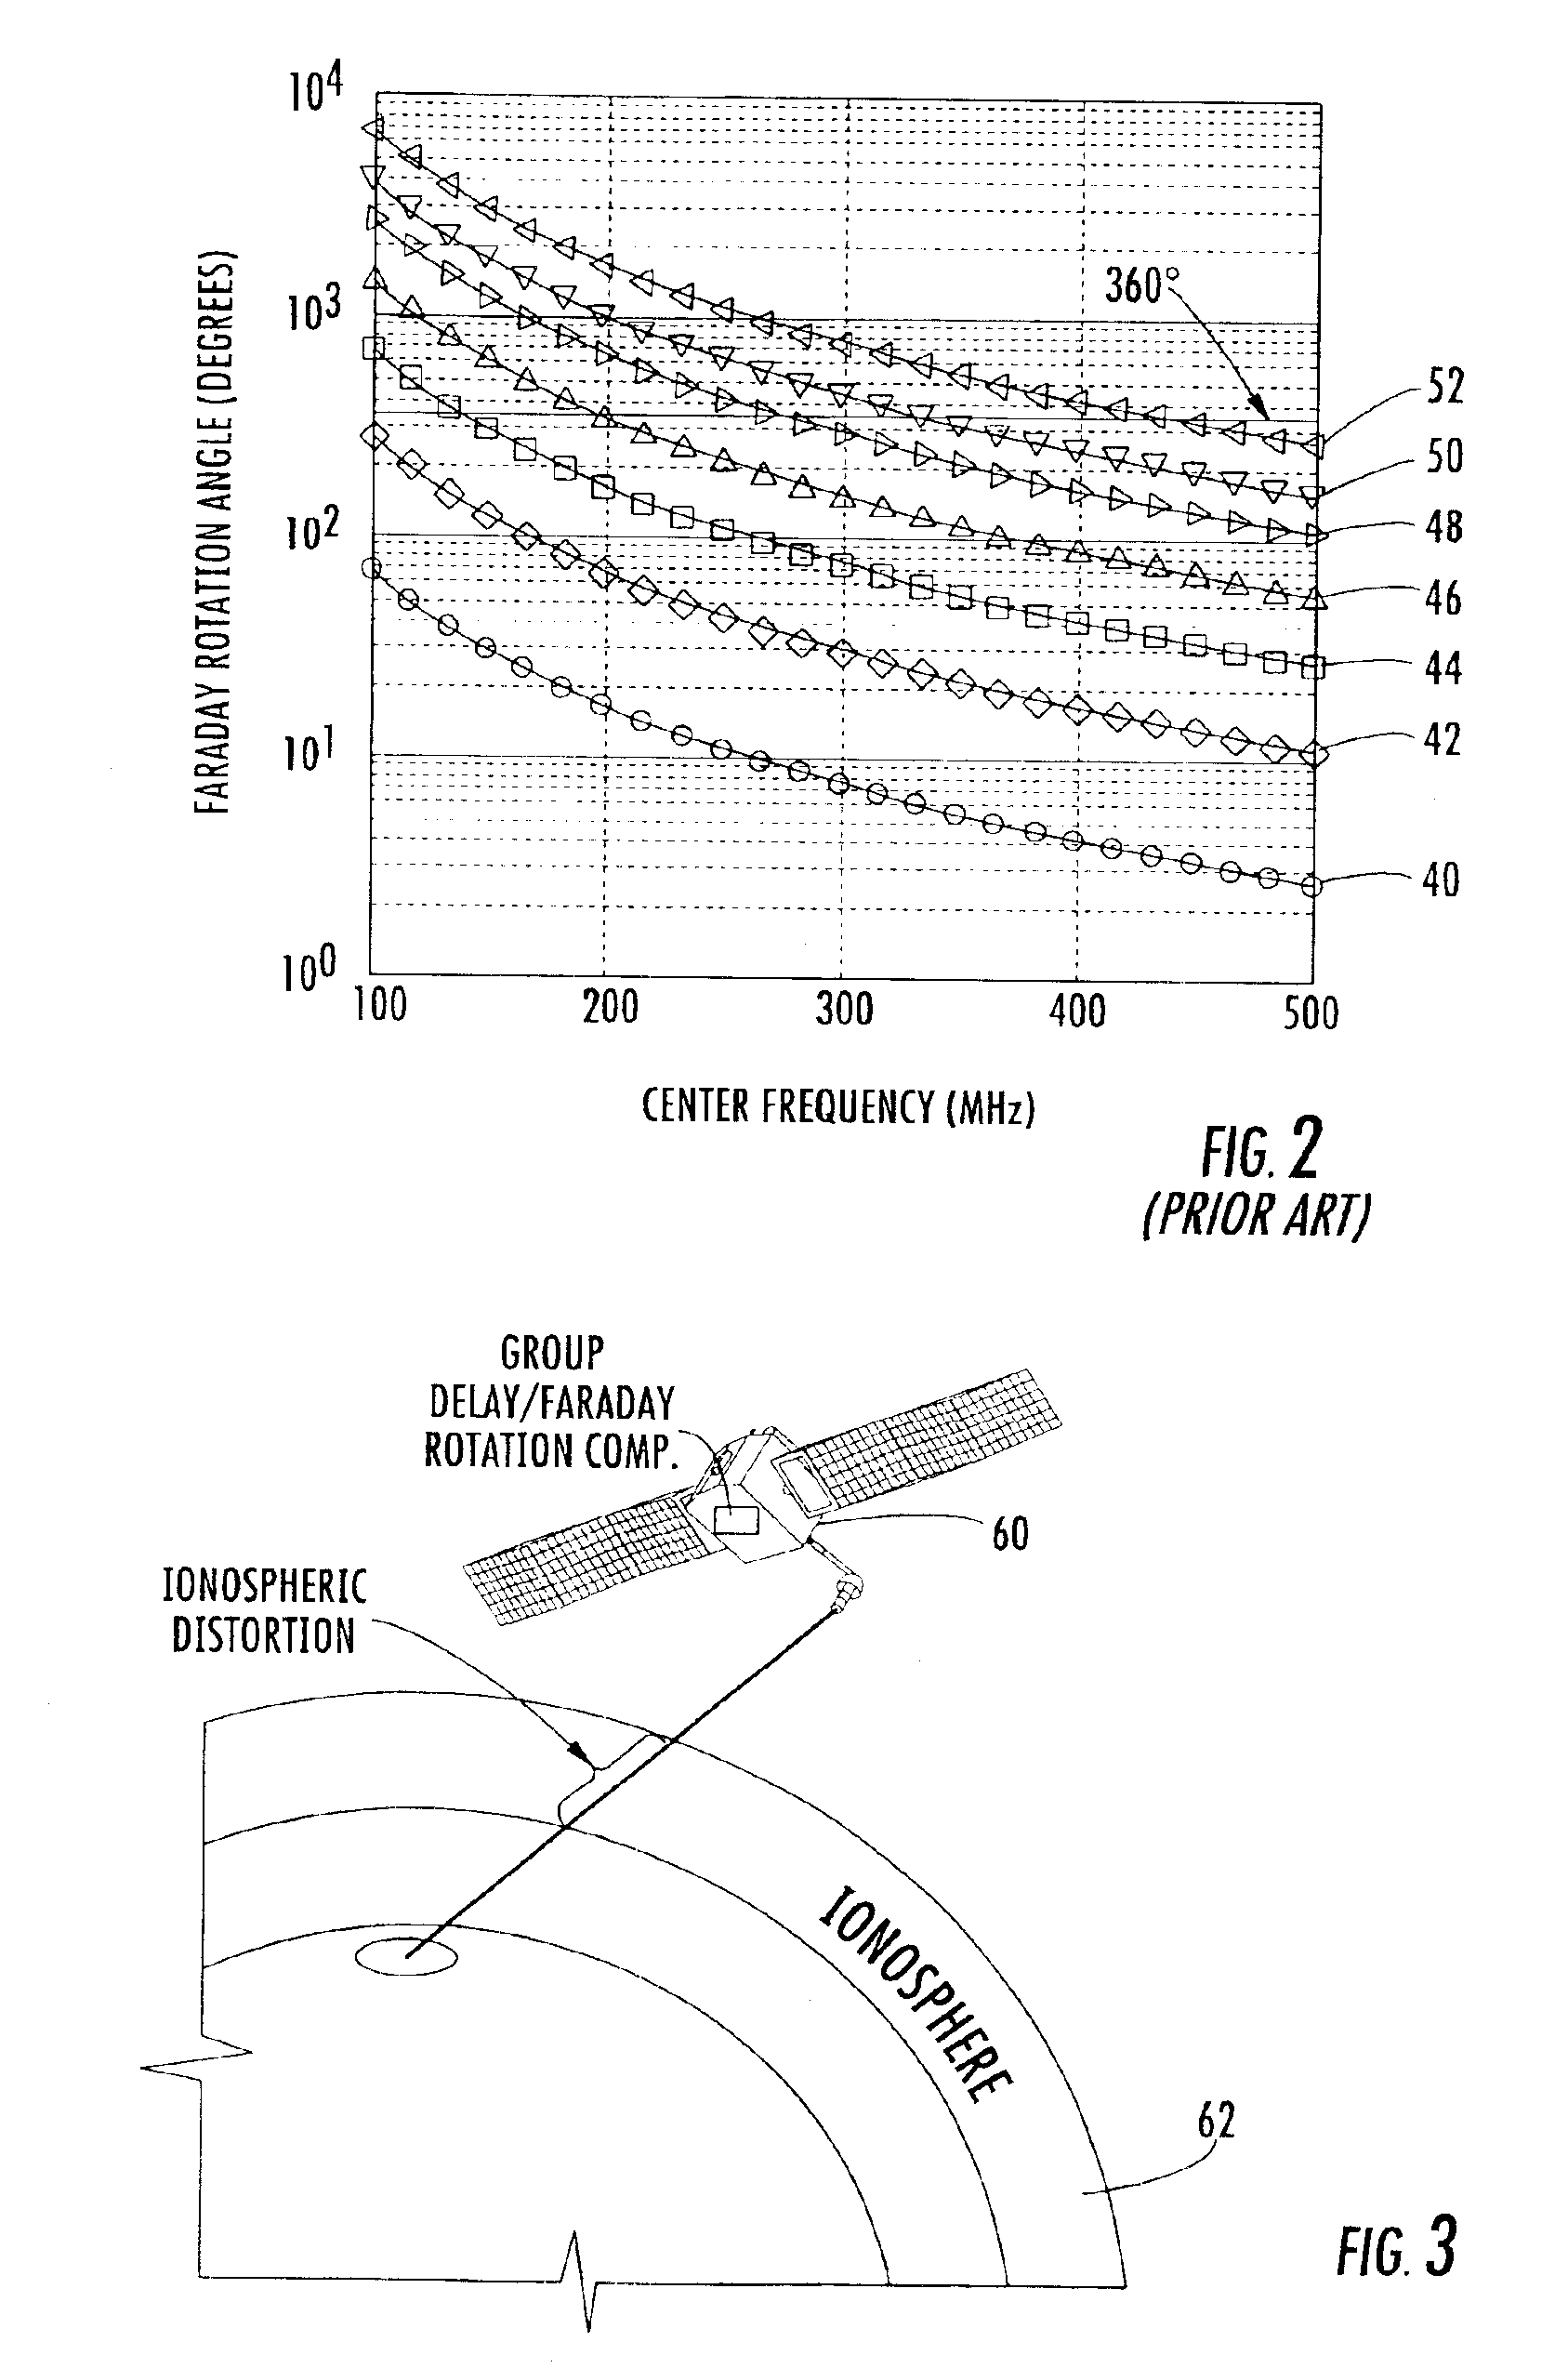 Synthetic aperture radar (SAR) compensating for ionospheric distortion based upon measurement of the Faraday rotation, and associated methods